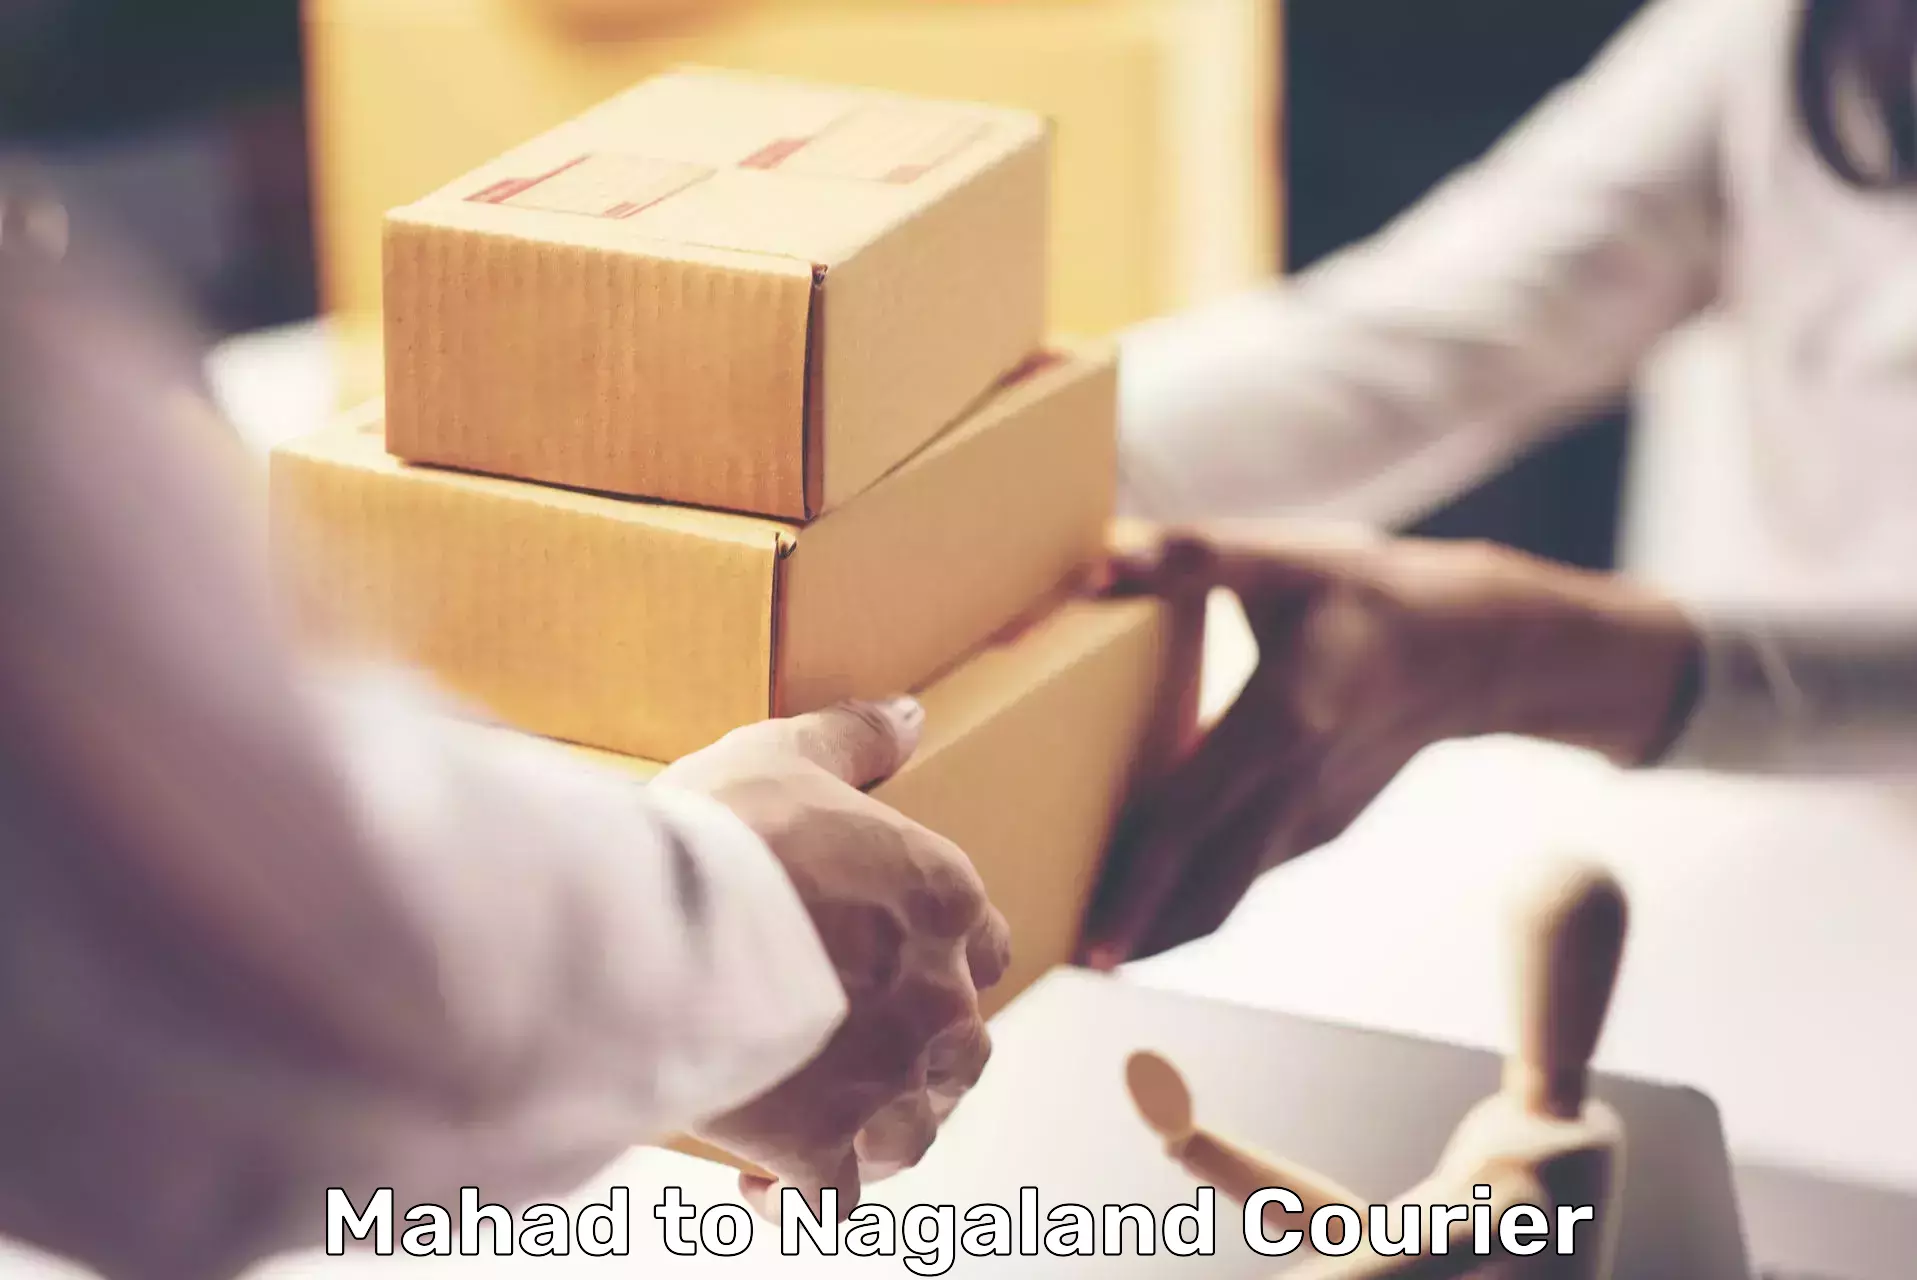 Cash on delivery service Mahad to Nagaland